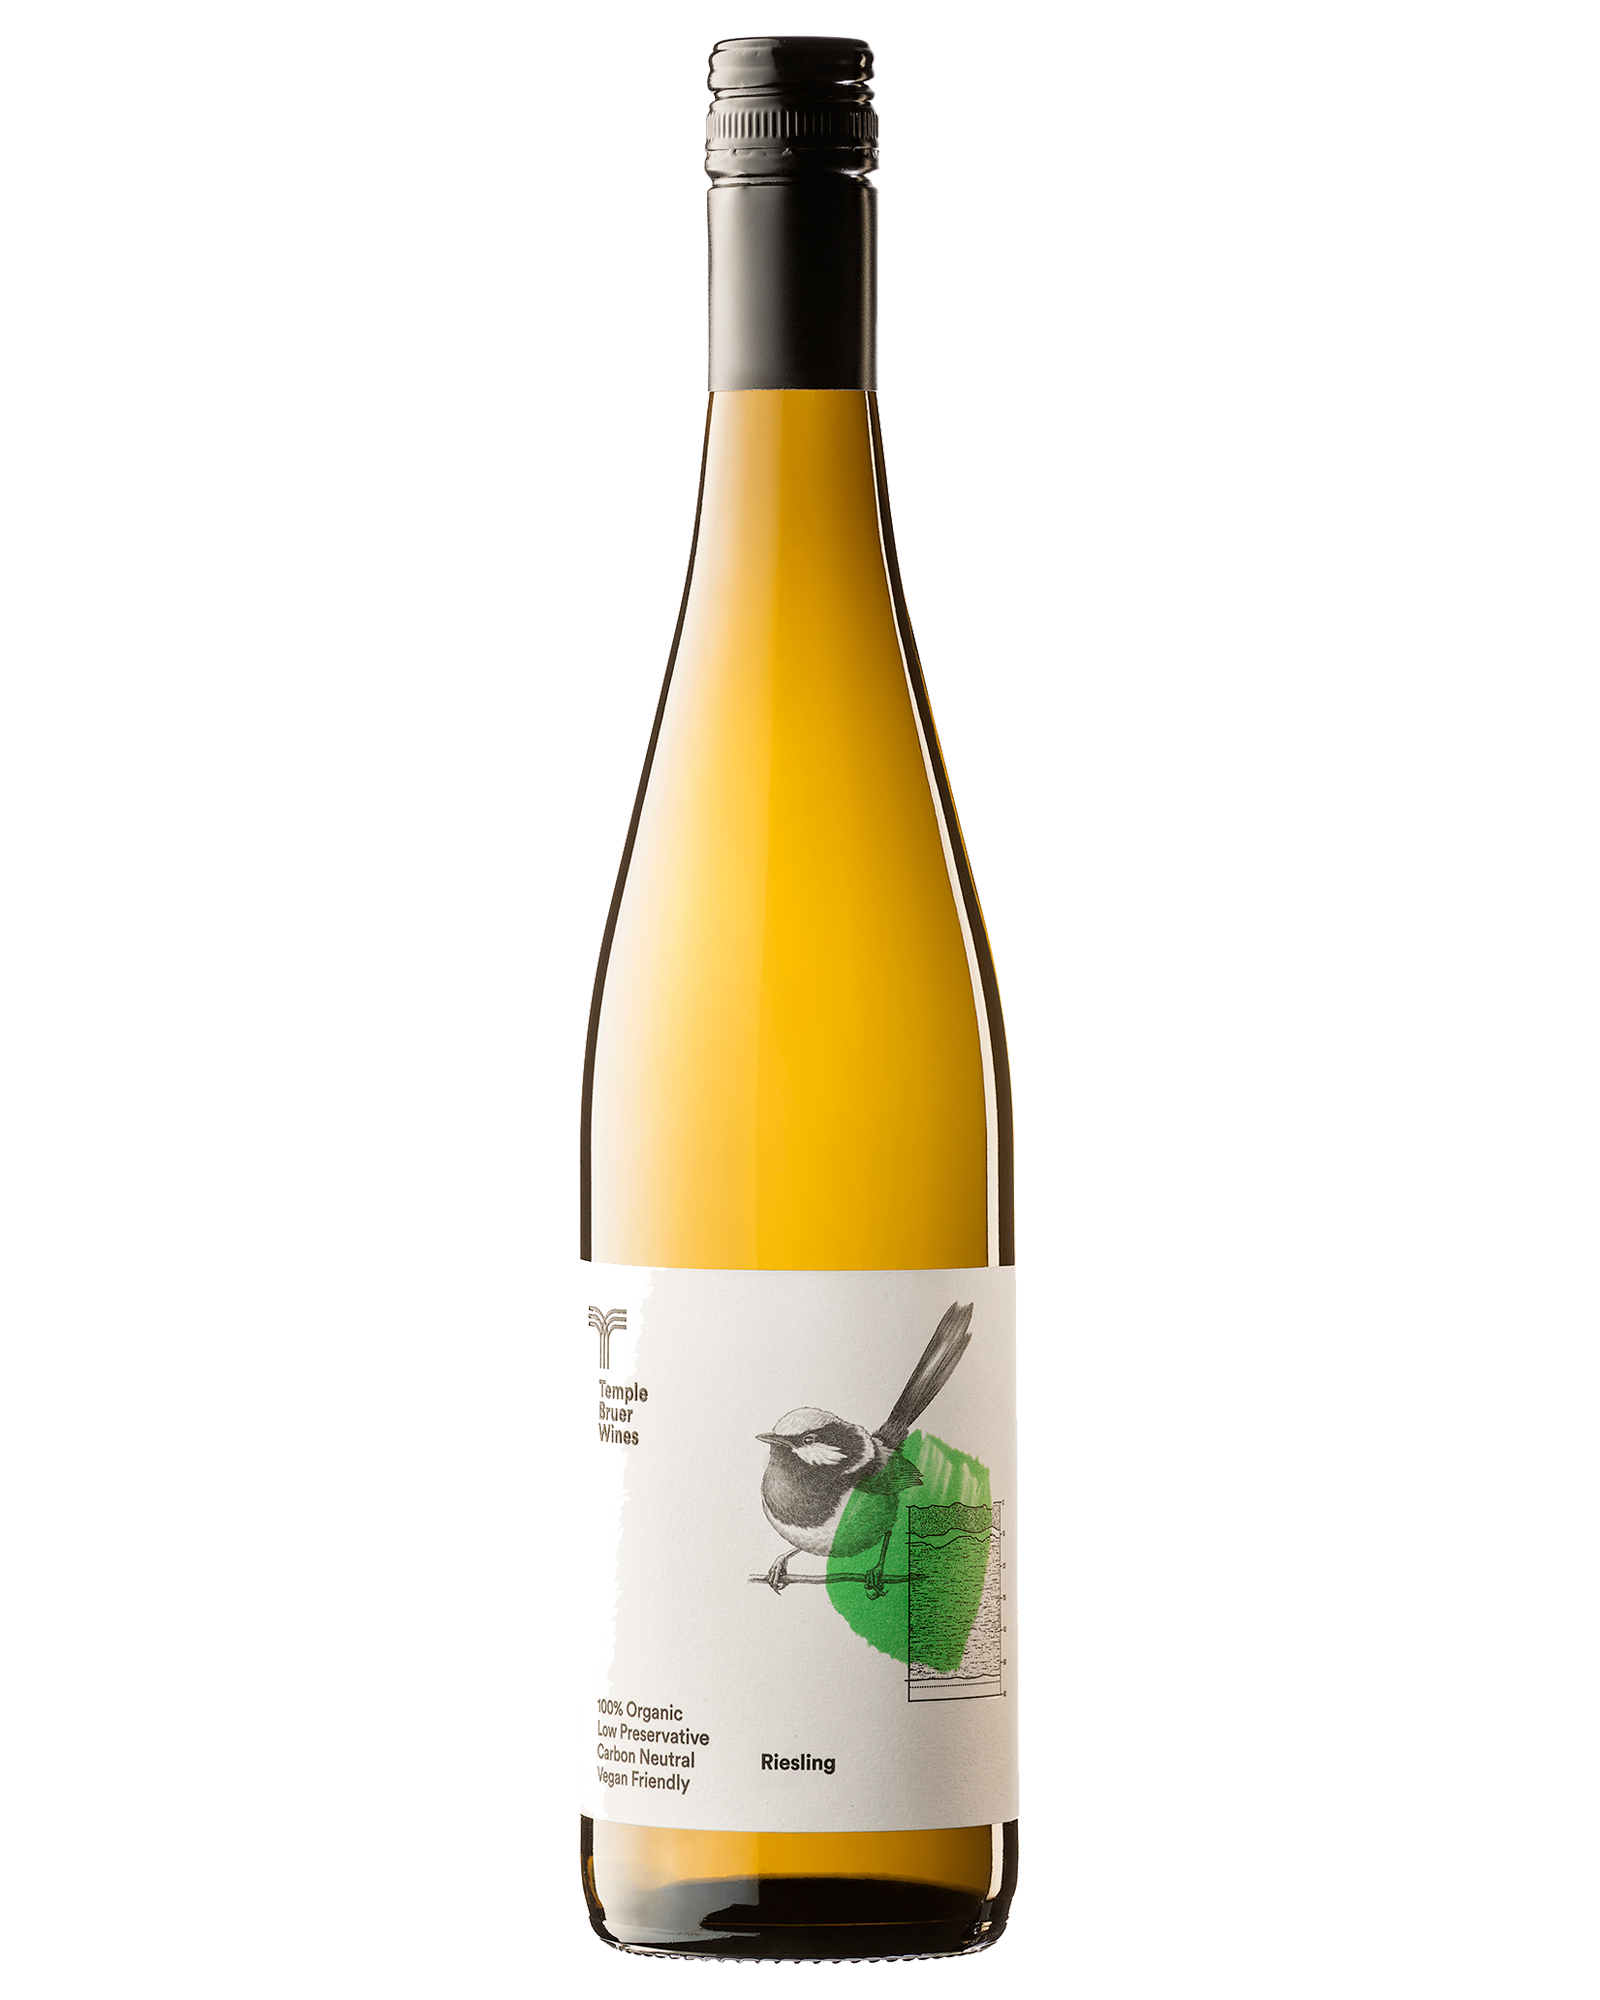 Temple Bruer Riesling